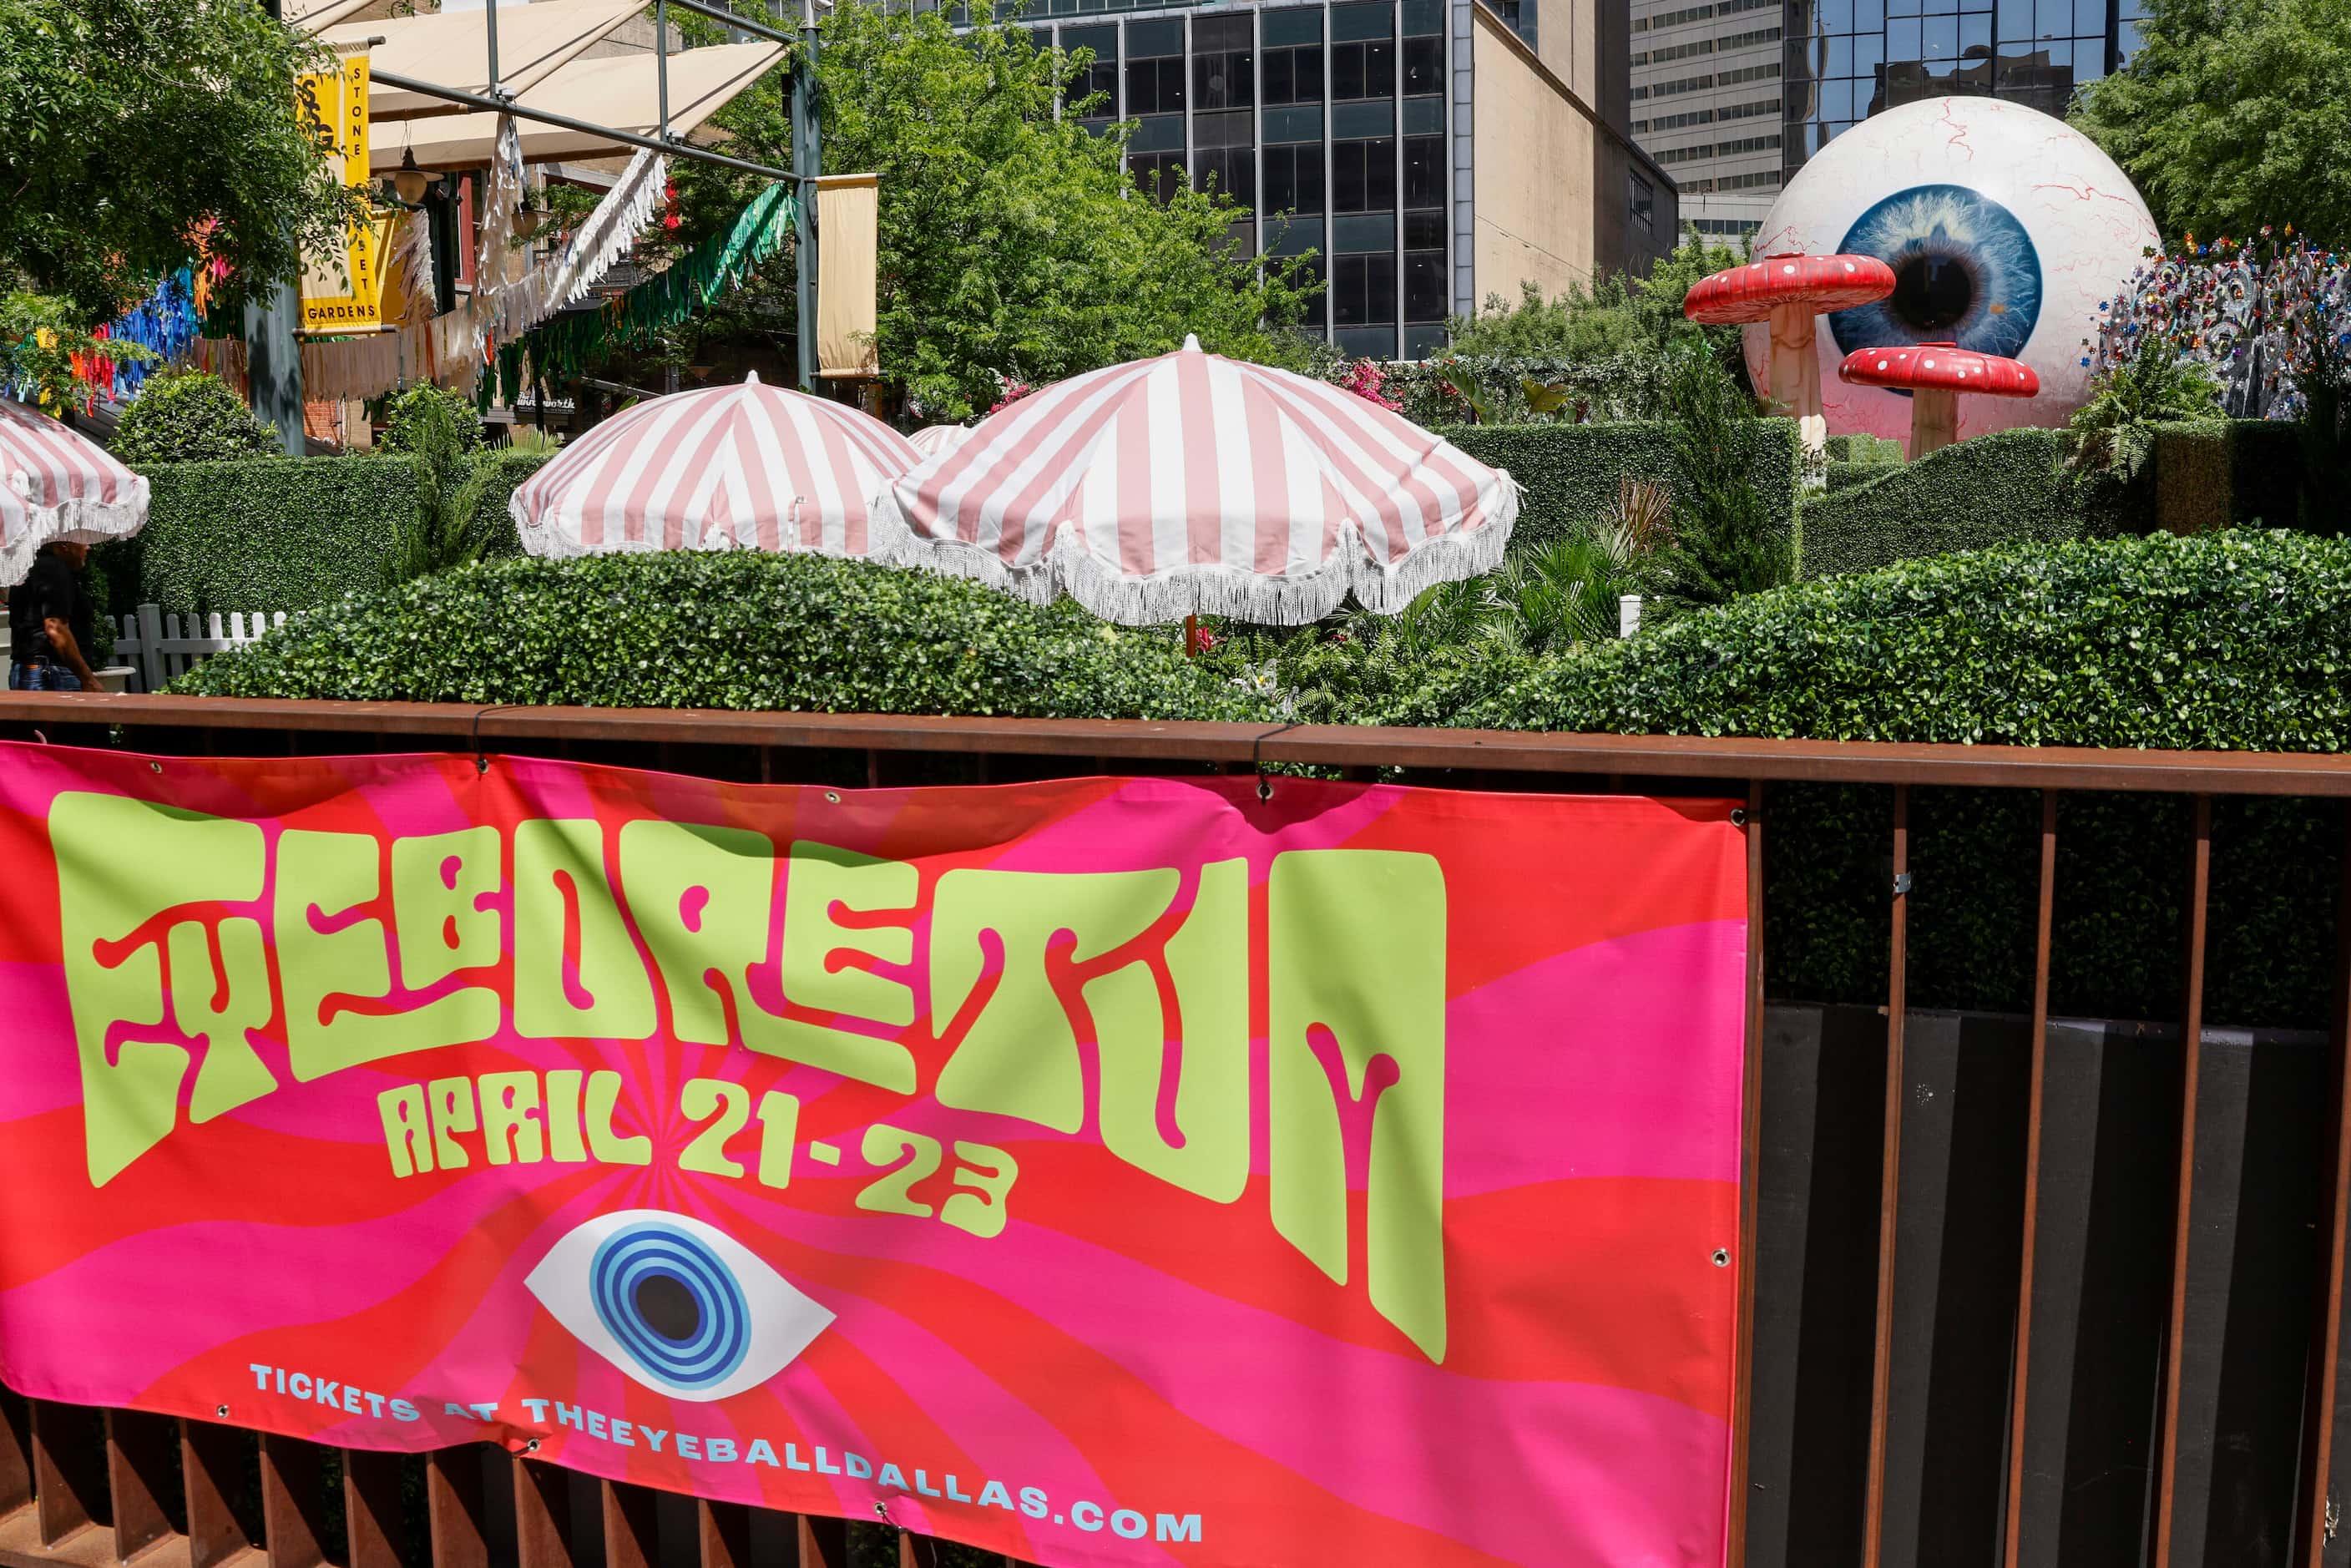 The Eyeboretum at The Eye at the Joule debuted Friday. The event is a celebration of the...